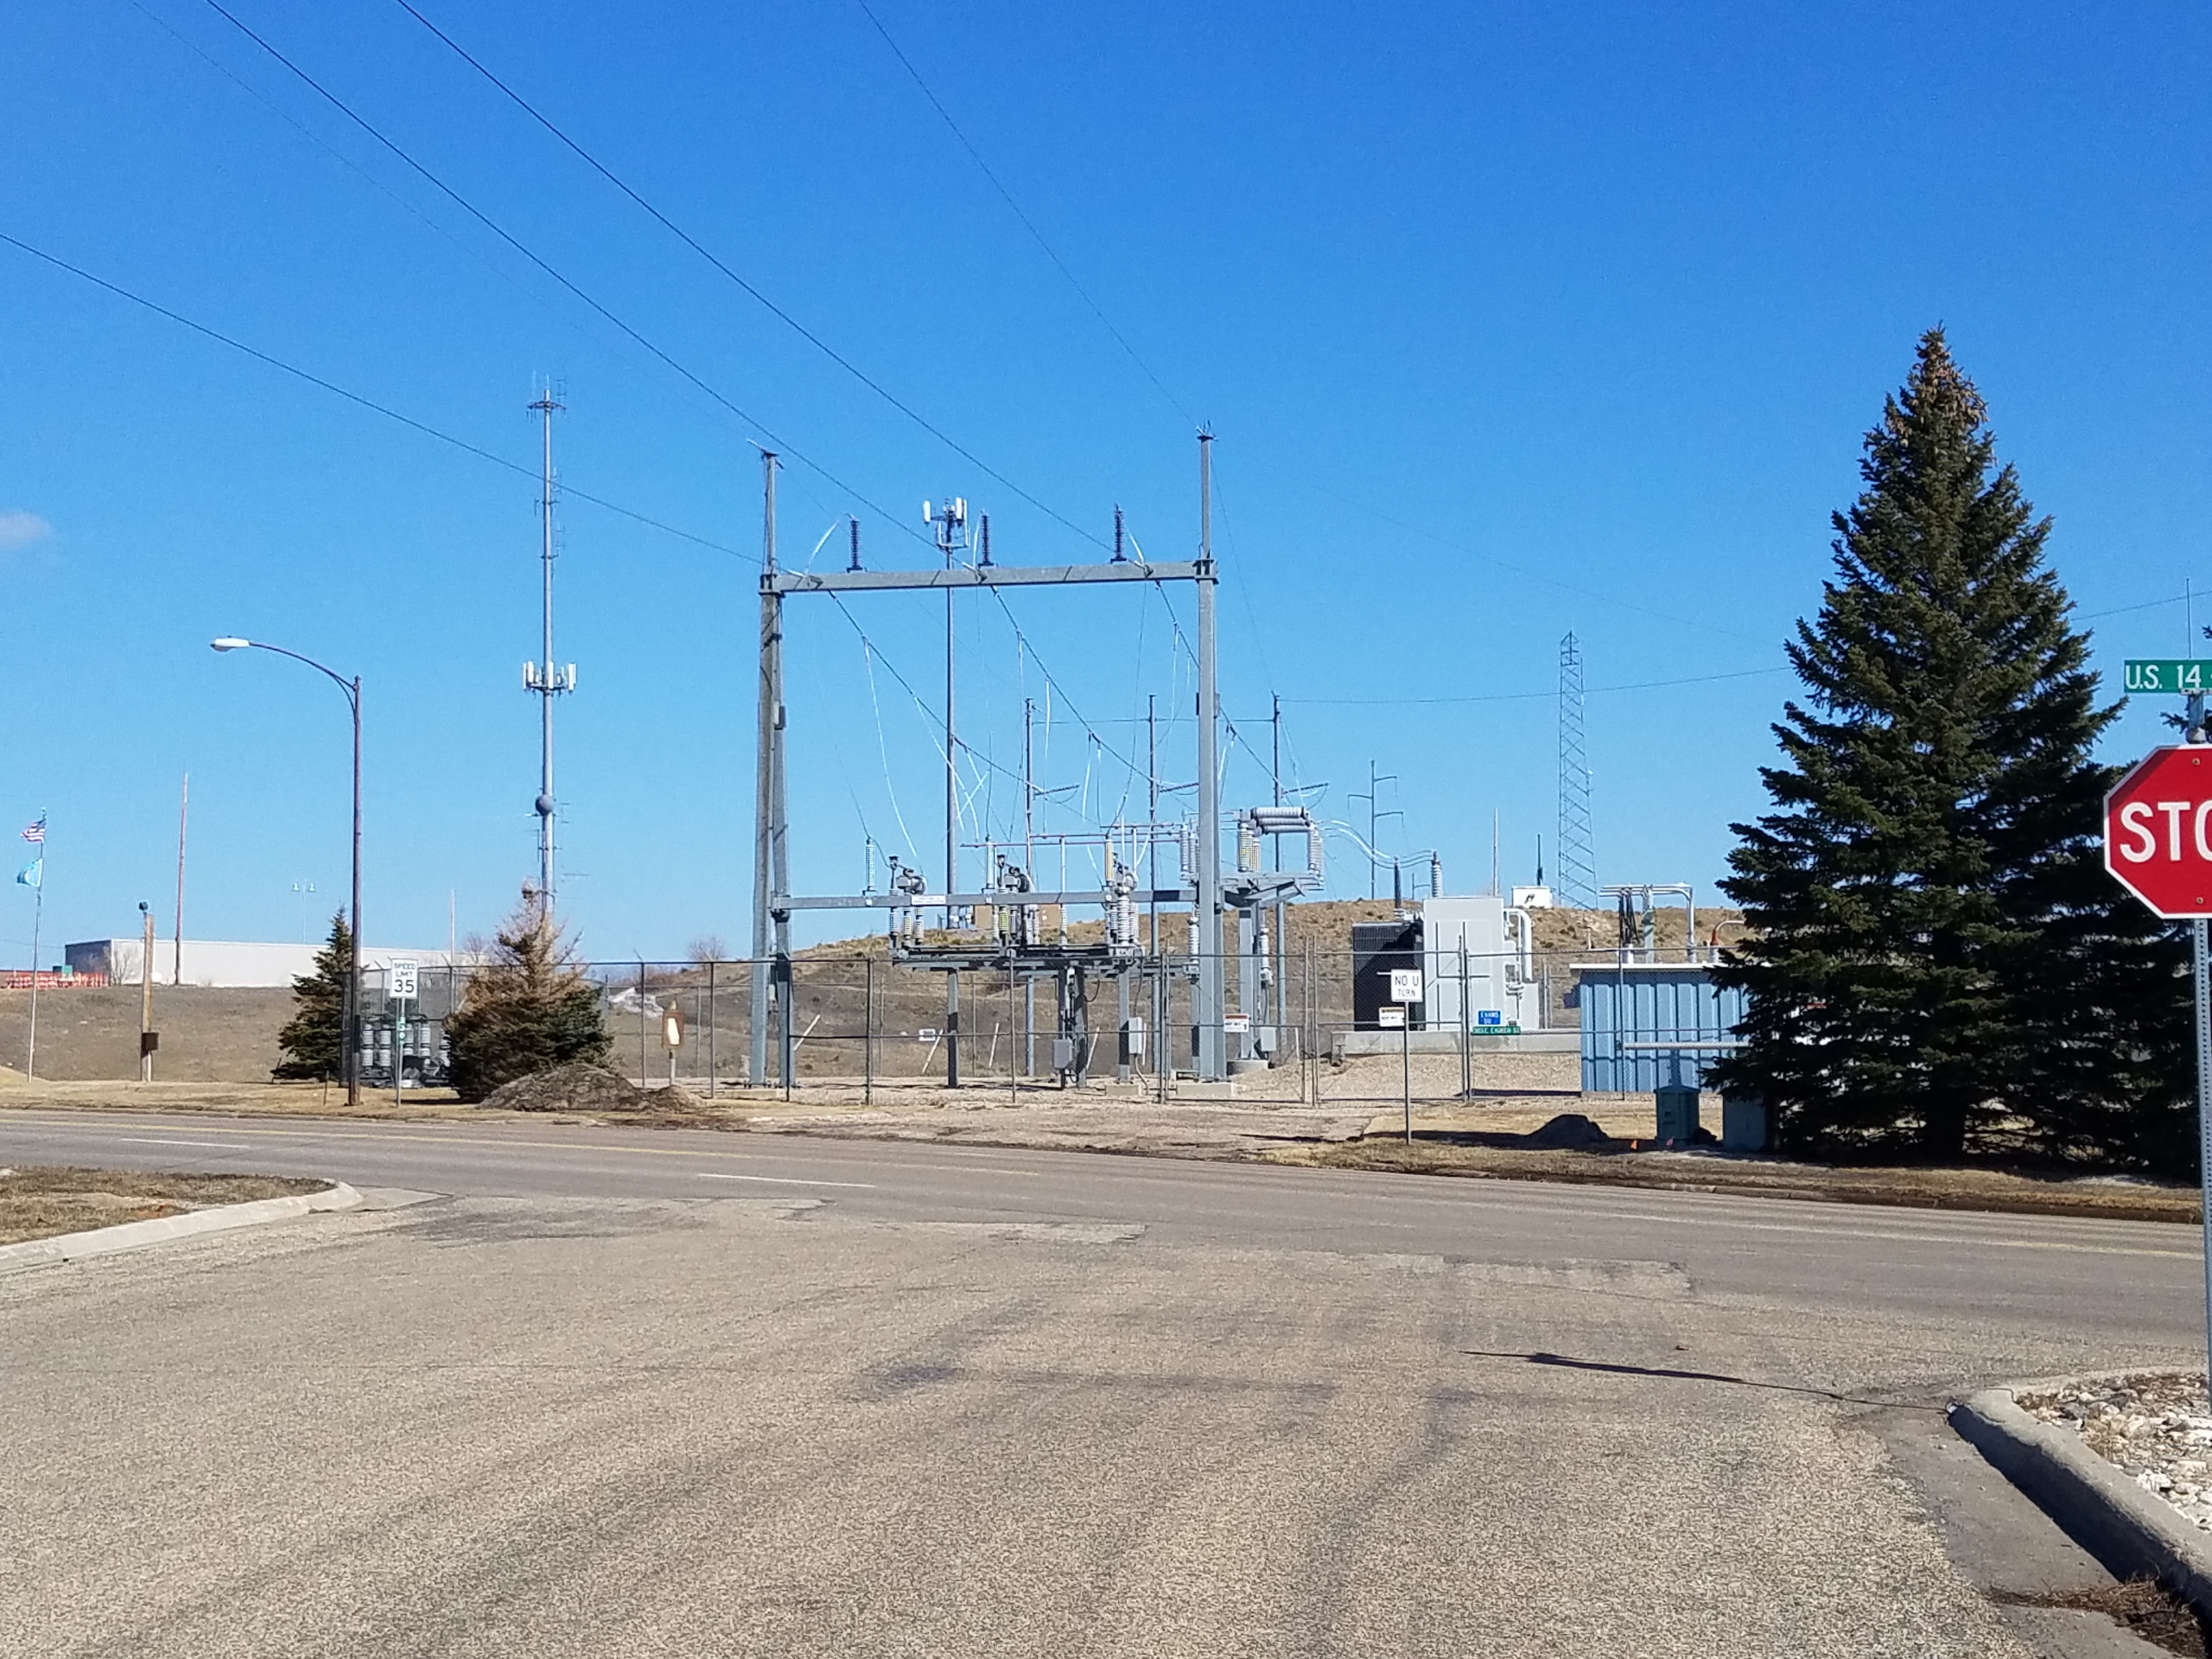 Pierre City Commission Approvals Final Actions On Evans Street Substation